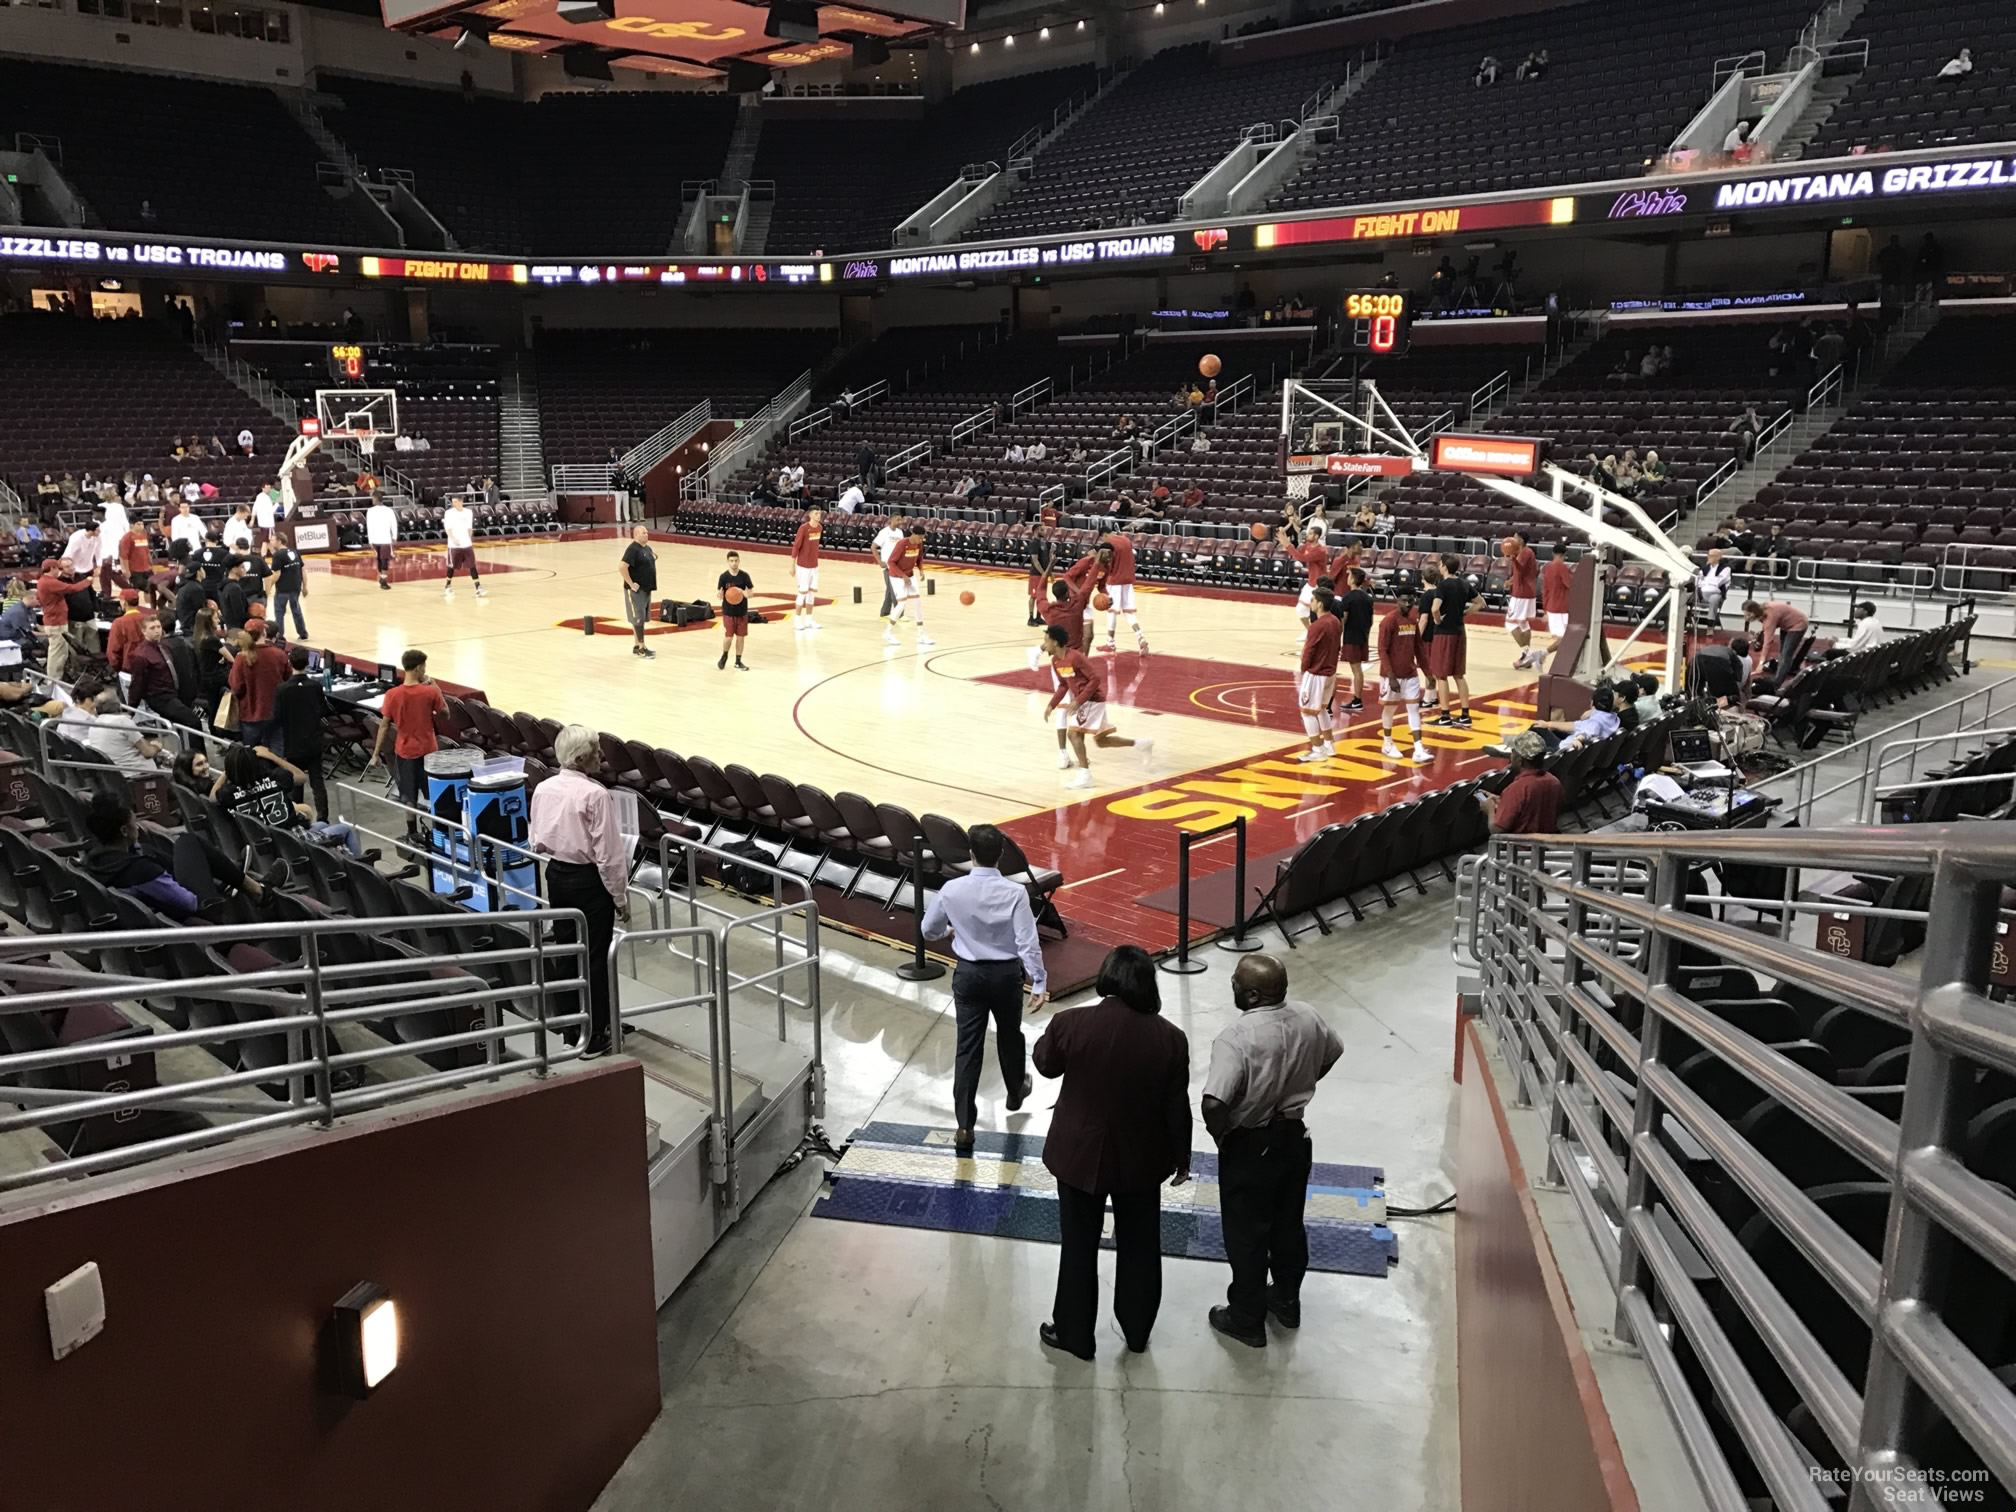 section 120, row 10 seat view  - galen center